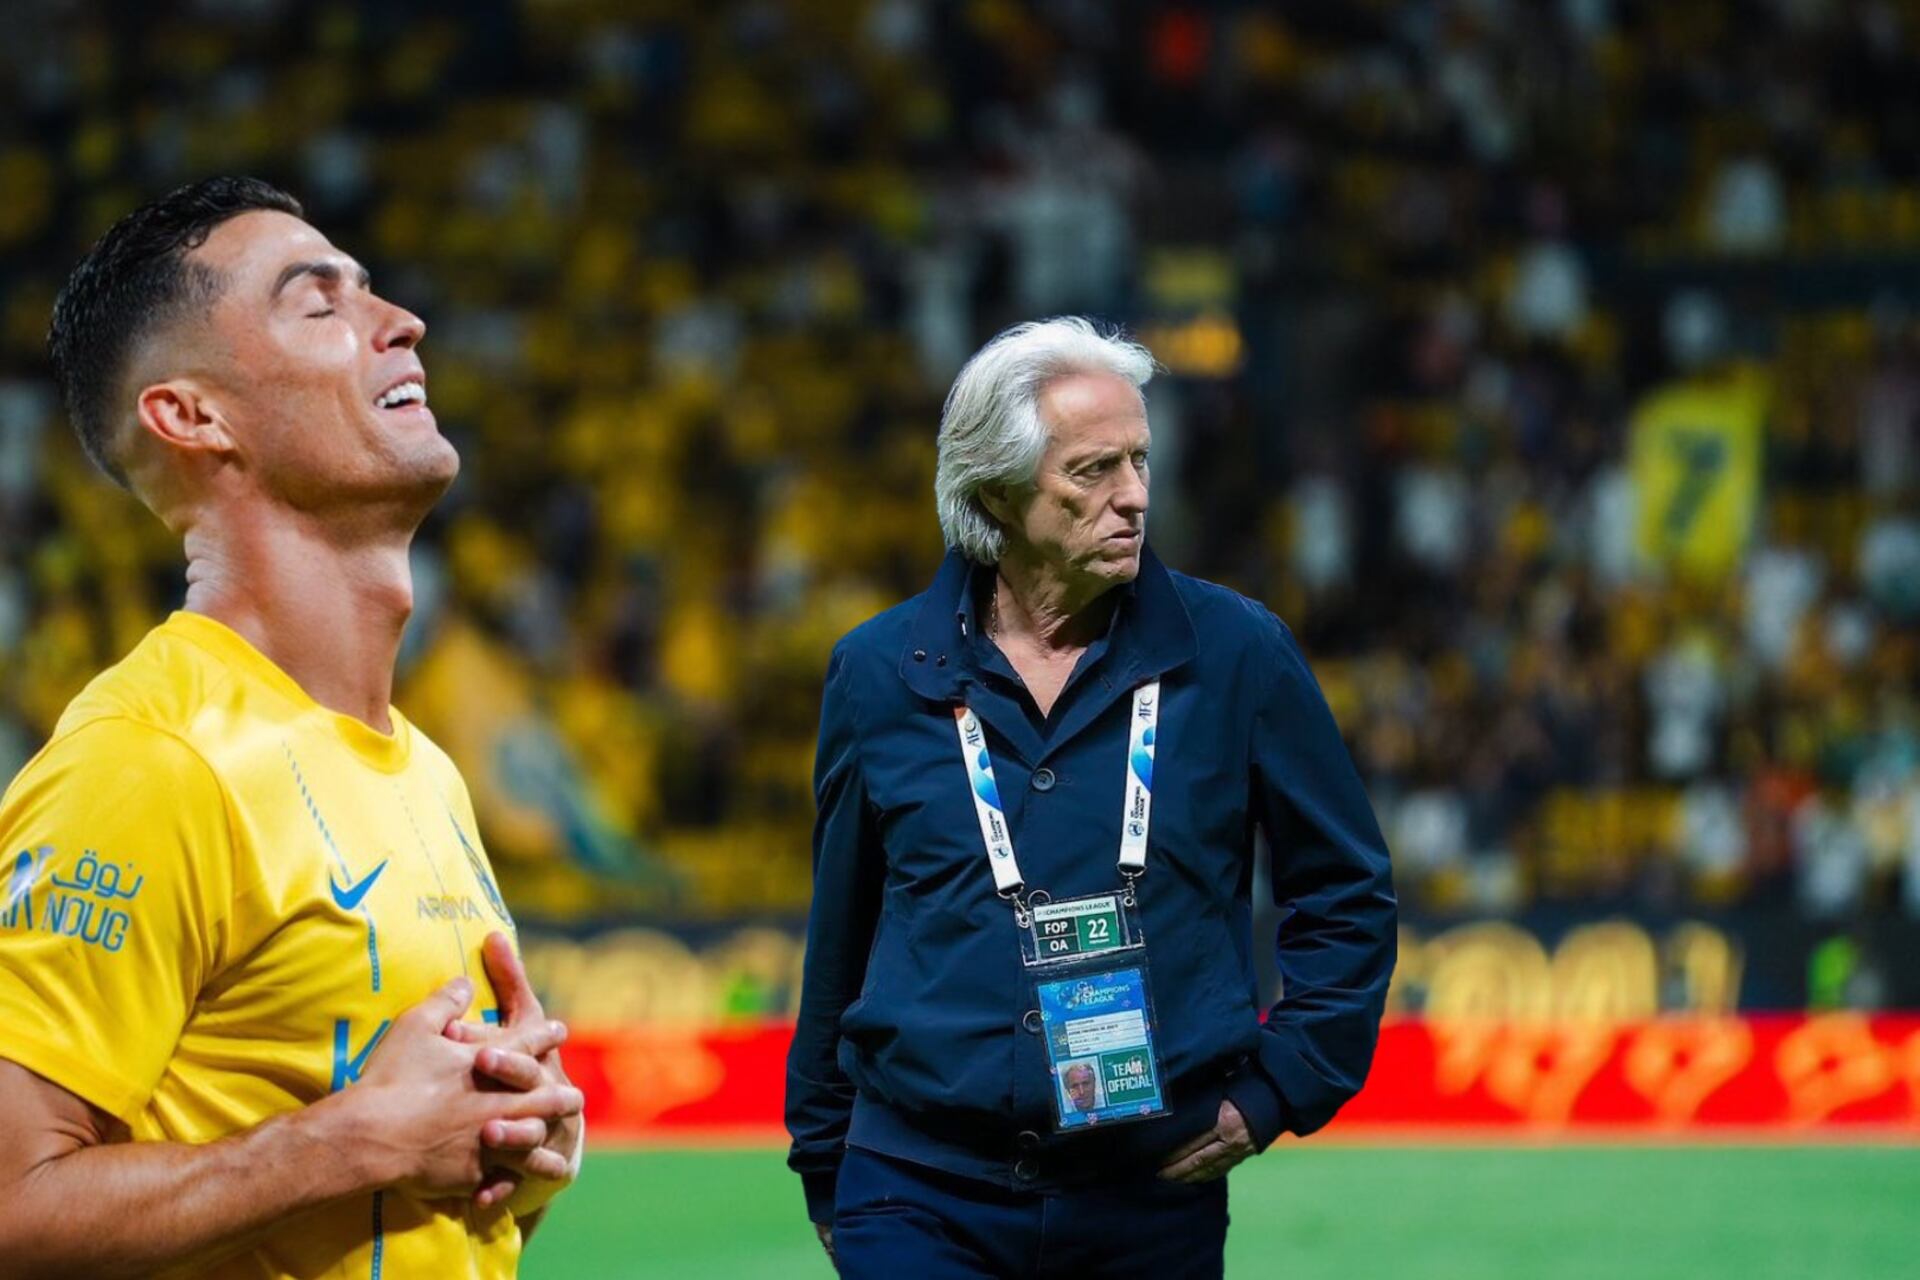 Despite the rivalry with Cristiano’s Al Nassr, Al Hilal’s Jorge Jesus gives CR7 this high praise that causes debate